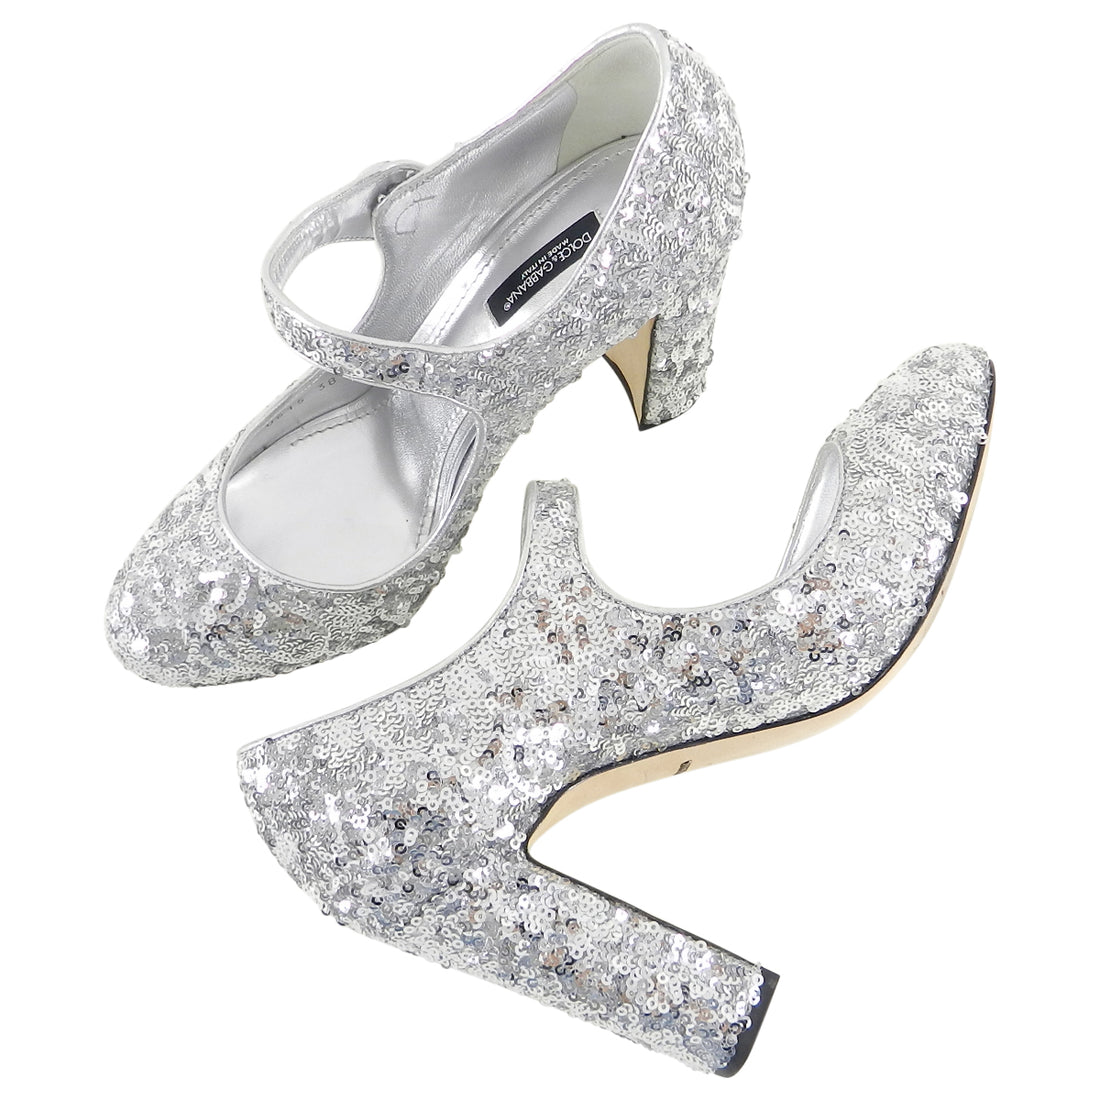 Dolce & Gabbana Vally Silver Sequin Mary Jane Shoes - 38